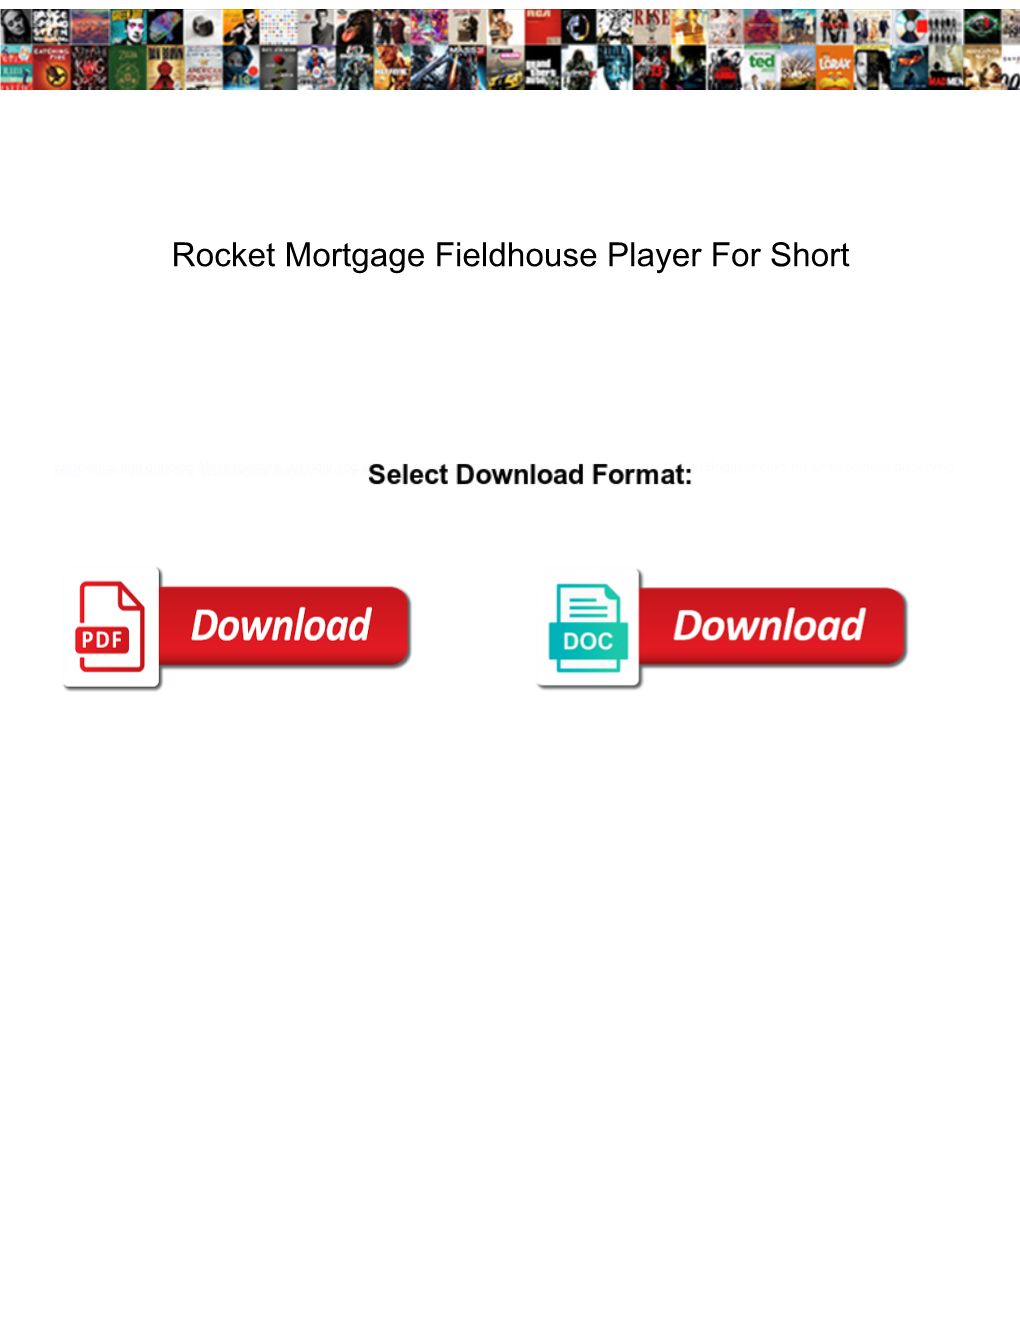 Rocket Mortgage Fieldhouse Player for Short